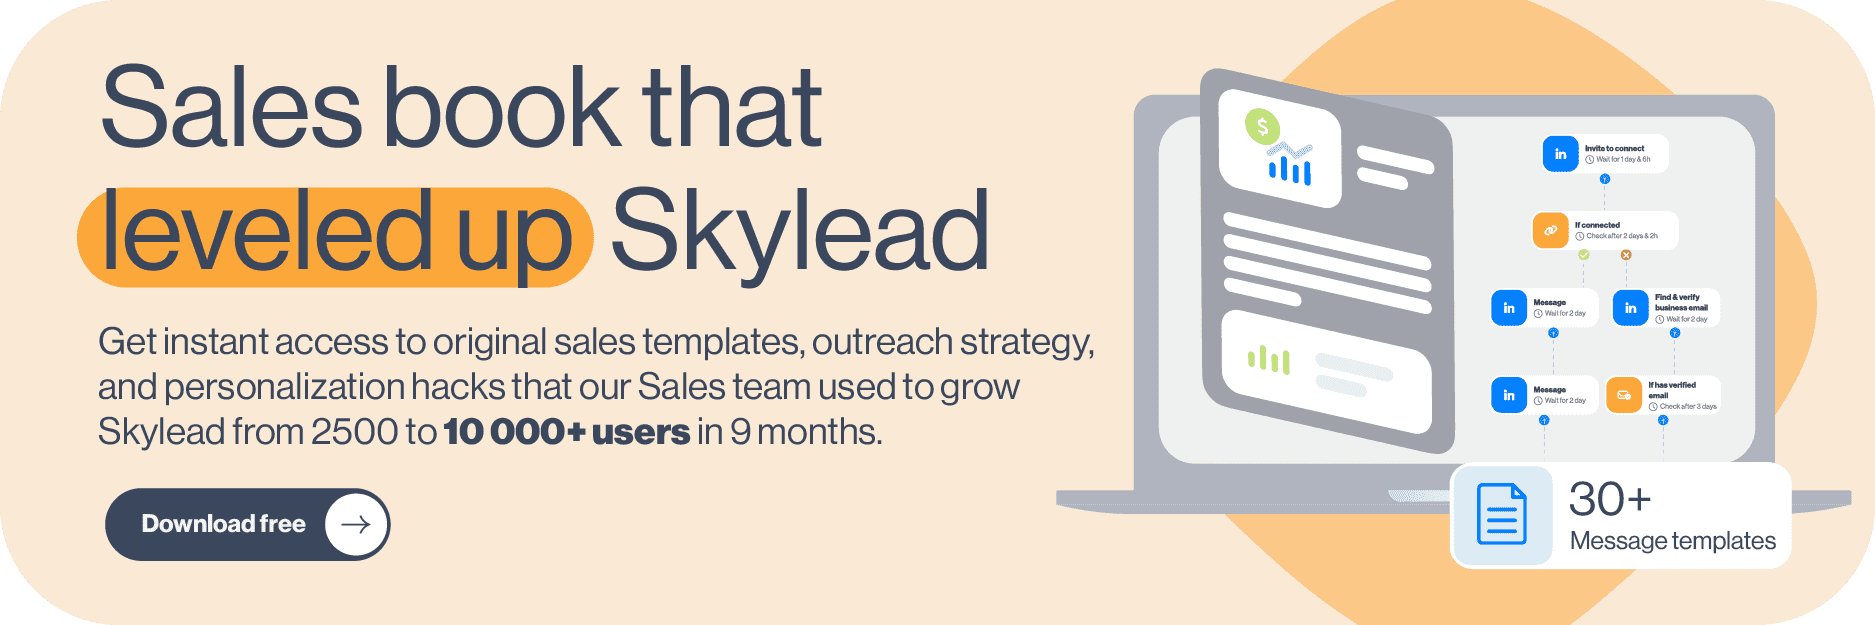 Image of CTA banner 2 for Skylead salesbook - ready-to-use outreach template that can be applied to our LinkedIn automation and cold email software